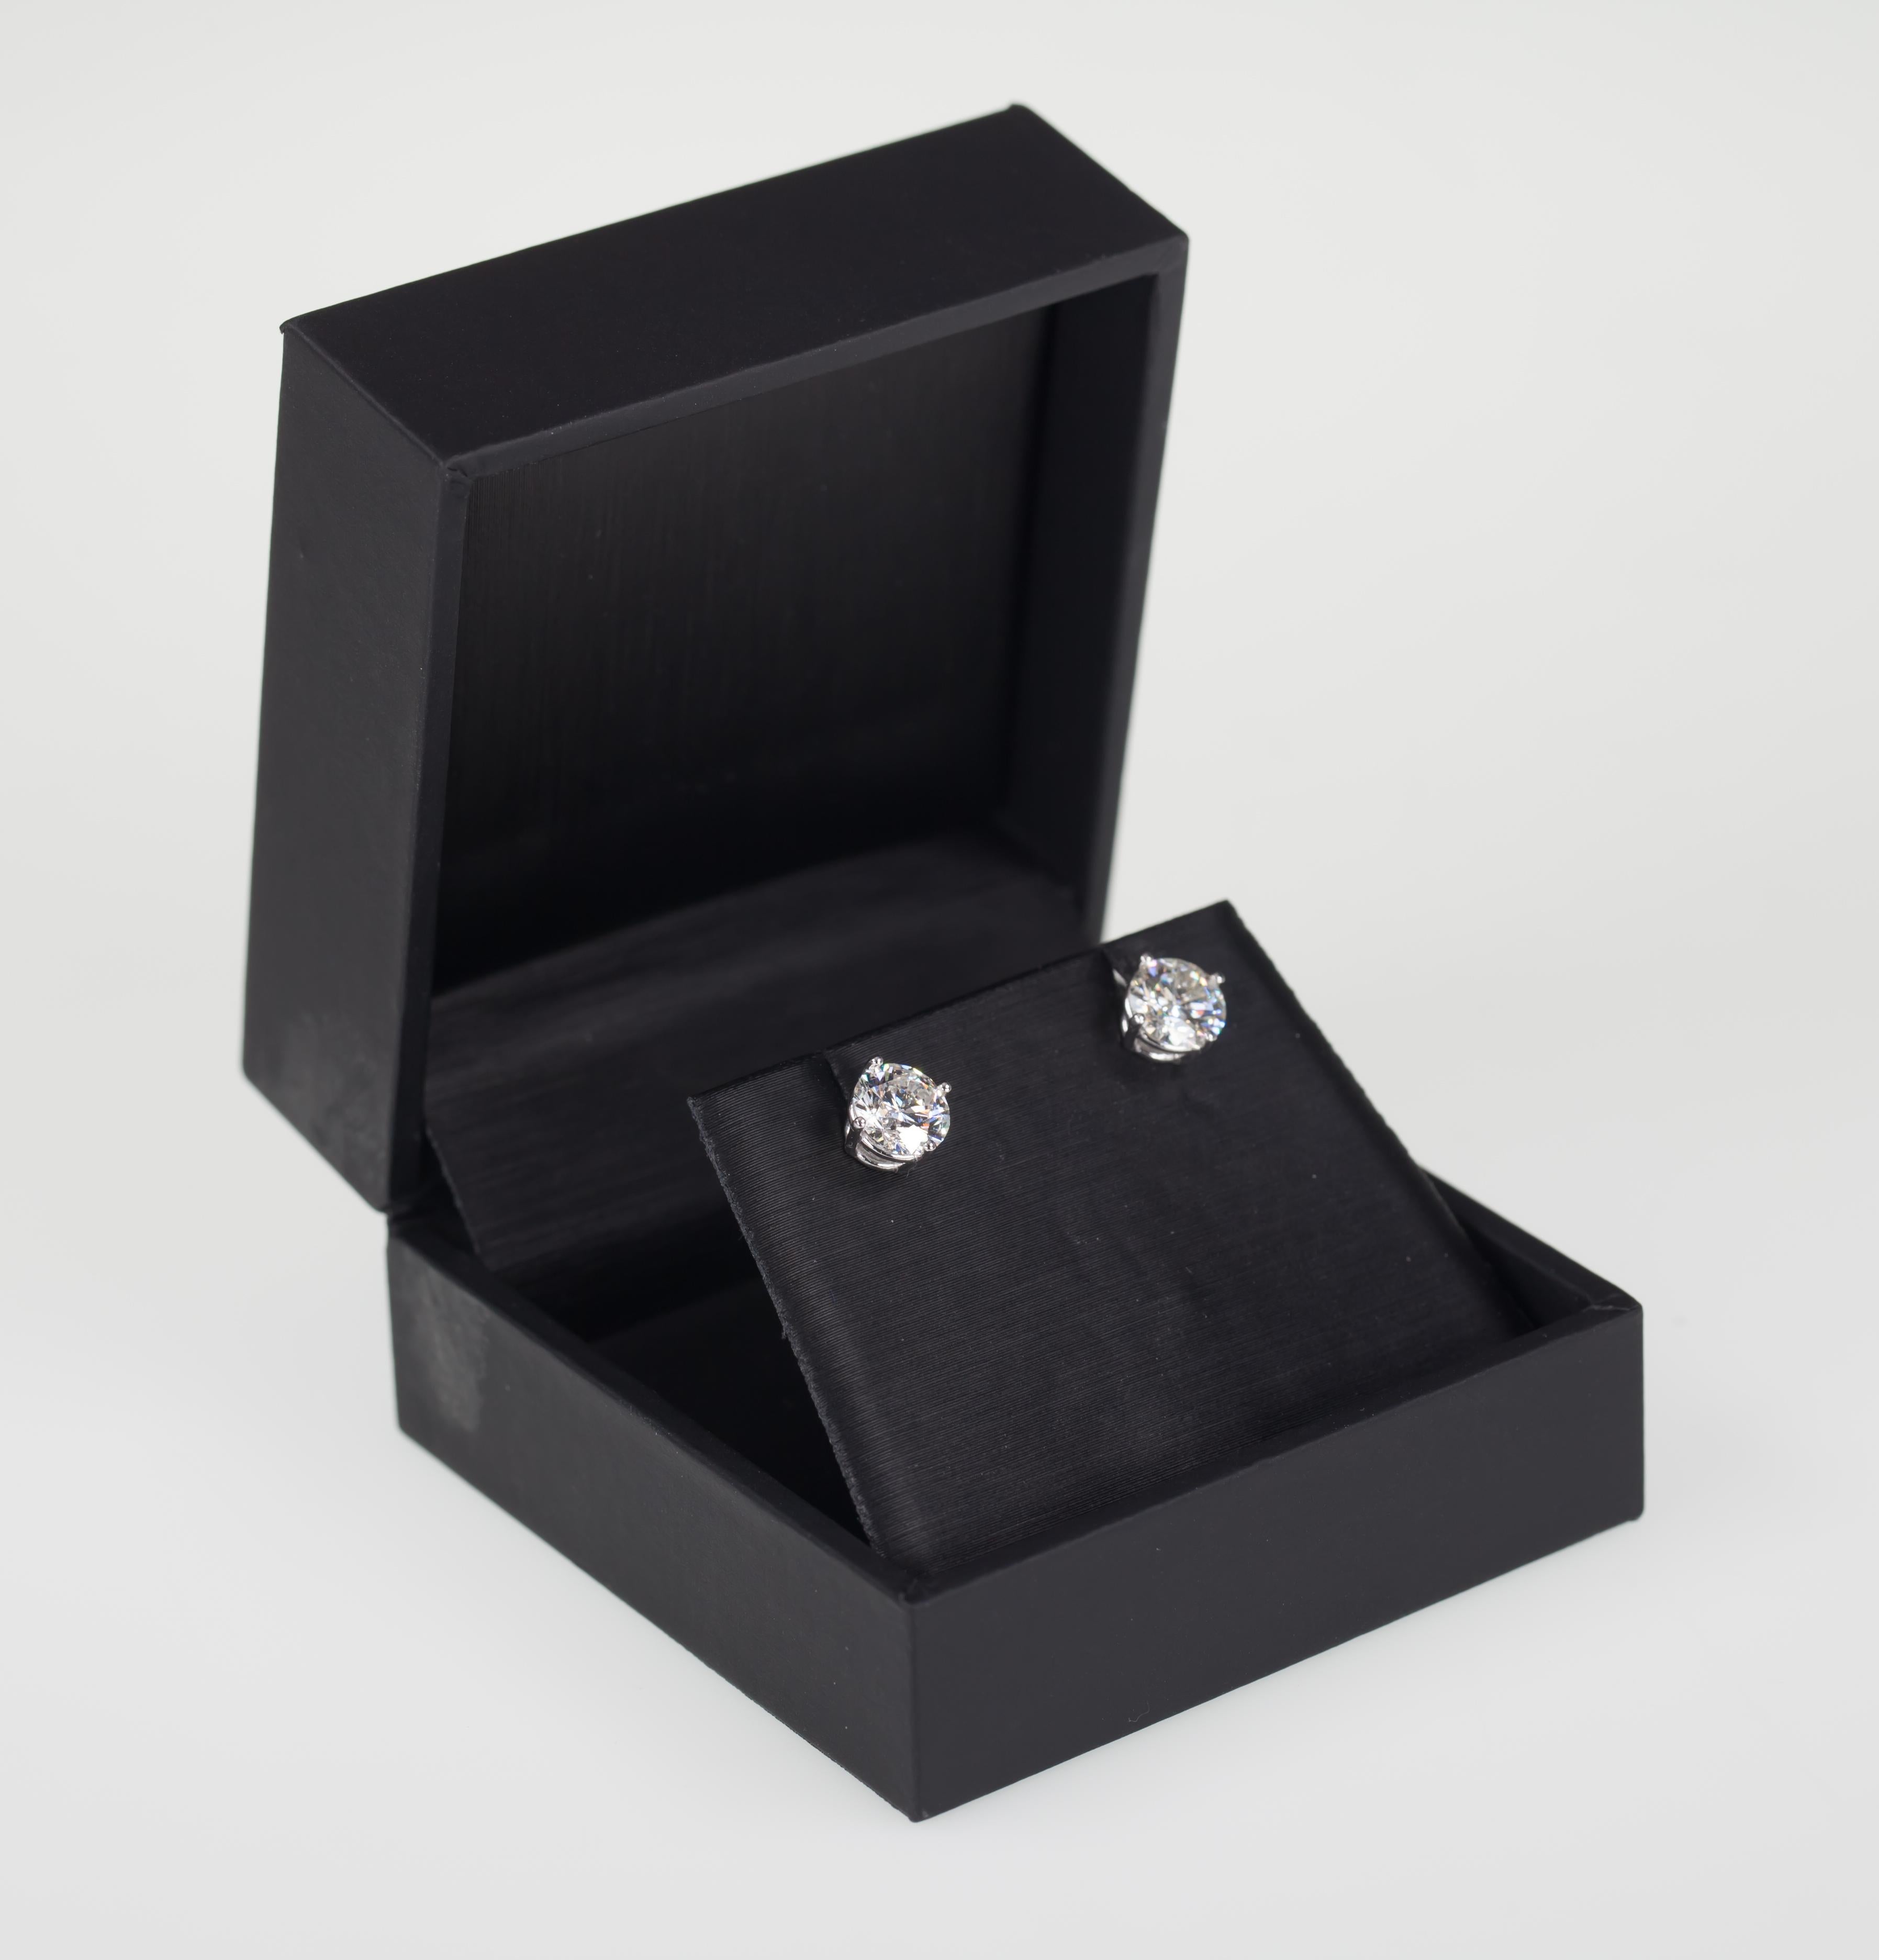 Beautiful Round Diamond Stud Earrings in 4-Prong Screwback Settings
Total Diamond Weight = 1.72 Cts
Average Color = H
Average Clarity = SI2
Dimensions of Diamonds
1) 6.12 mm x 2.86 mm
2) 6.13 mm x 3.62 mm
Total Mass = 1.55 grams
Beautiful Gift!